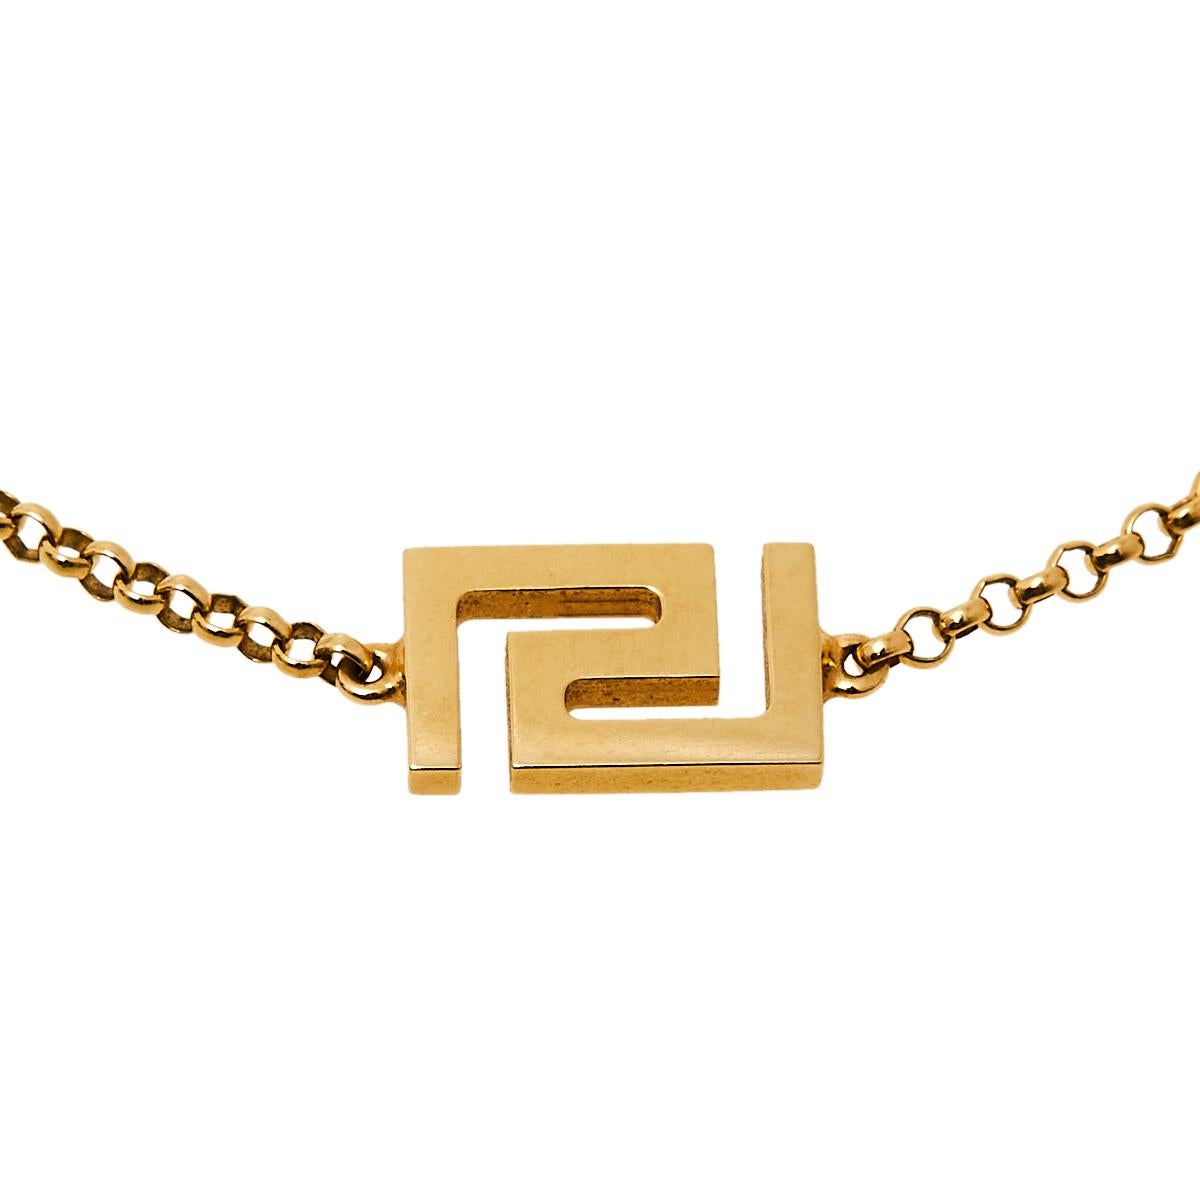 Artfully made from 18k yellow gold, this flawless bracelet by Versace can be your next prized possession. Featuring a gorgeous signature Greek key charm, the design has been finished with a lobster clasp on the chain. The piece is simple and